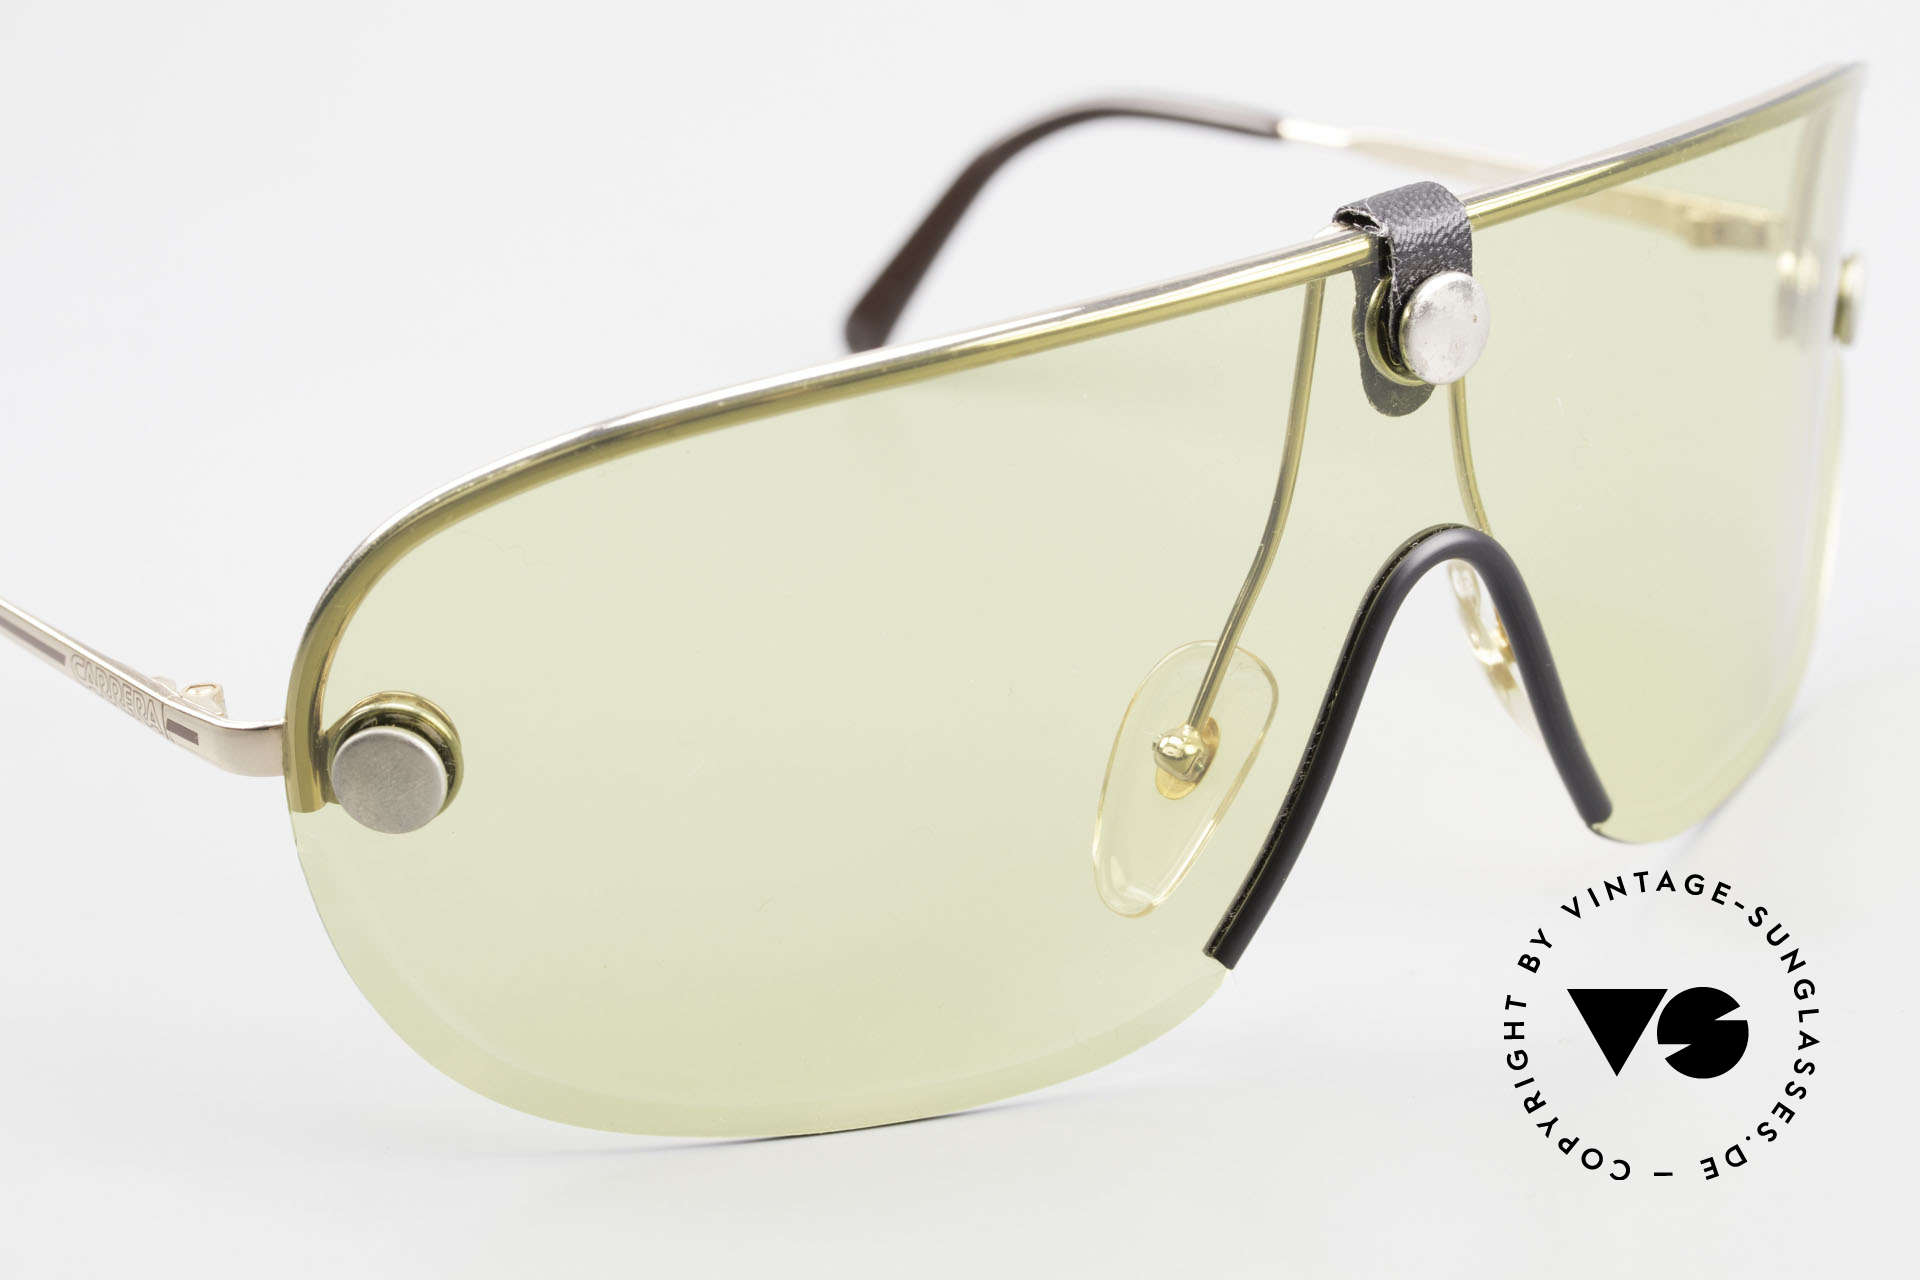 Carrera 5418 All Weather Sunglasses Polar, yellow lens wearable at dusk and bown lens at daytime, Made for Men